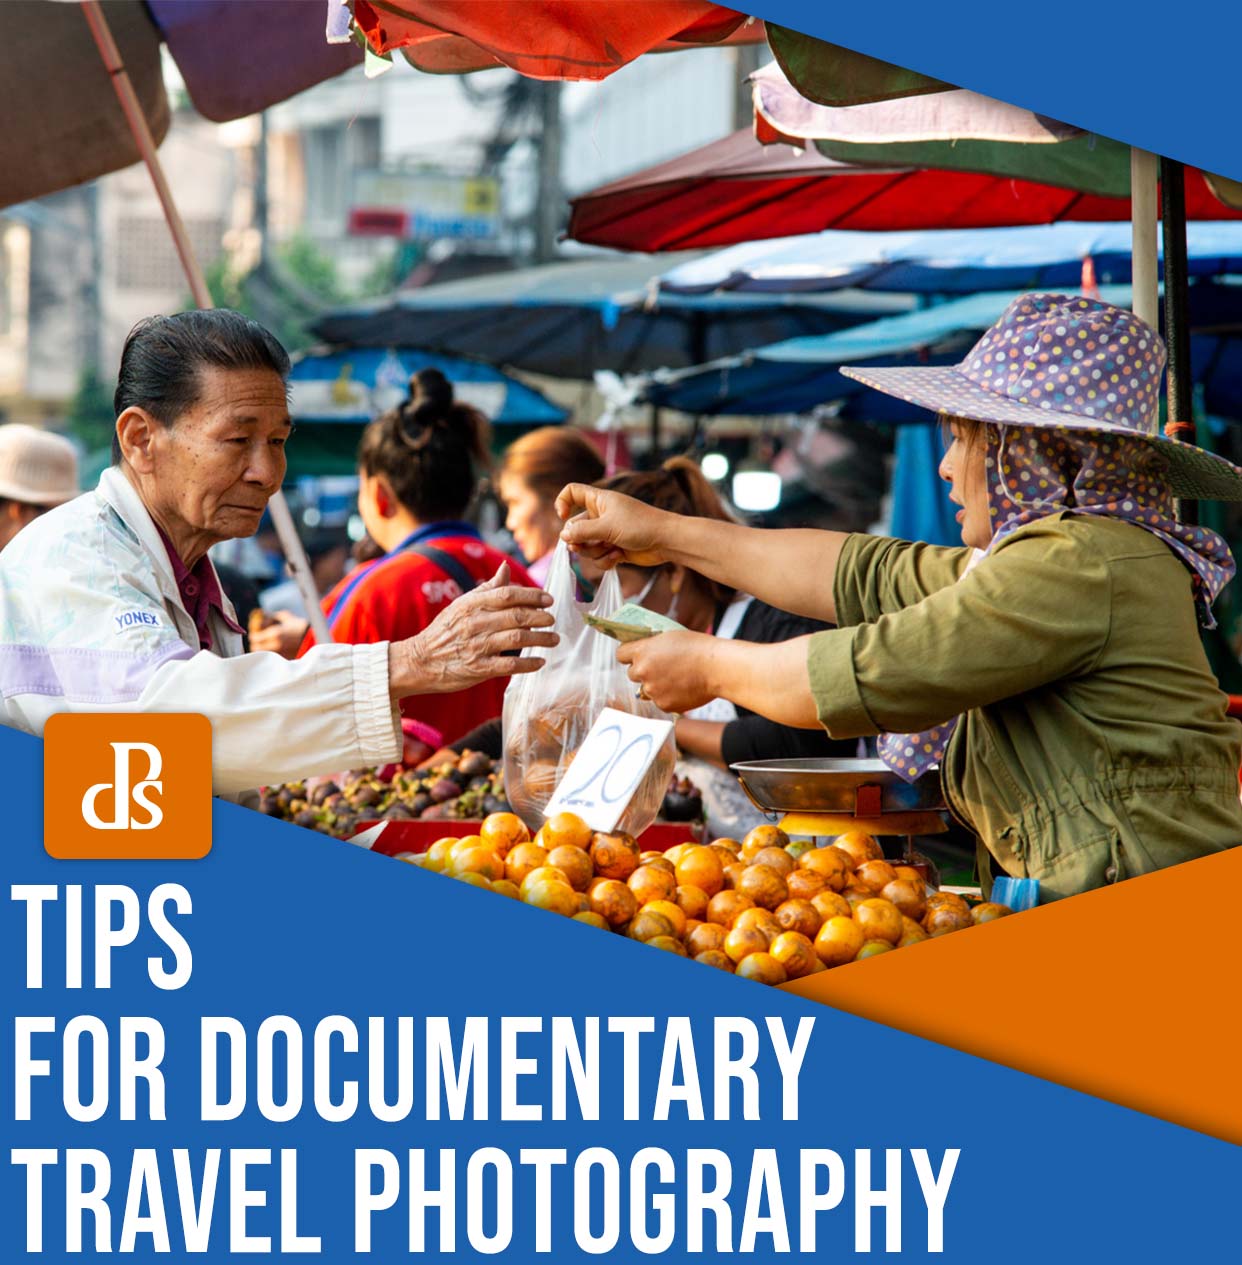 Tips for documentary travel photography